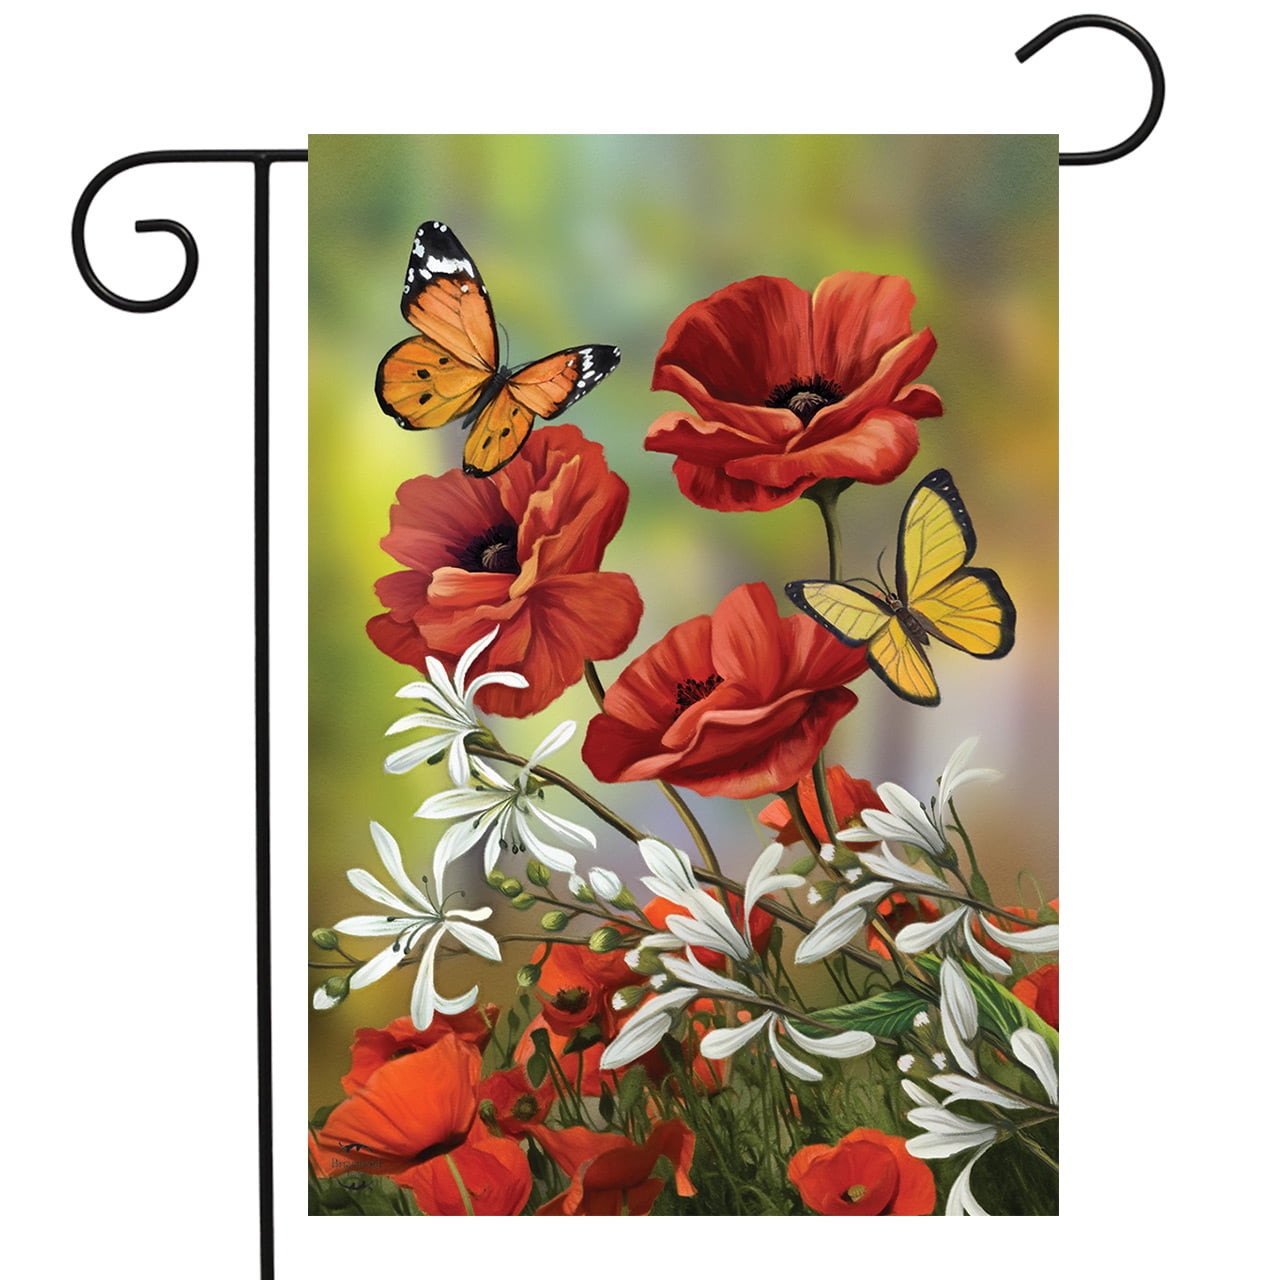 Butterflies and Poppies Spring Garden Flag Floral 12.5" x 18" Briarwood Lane